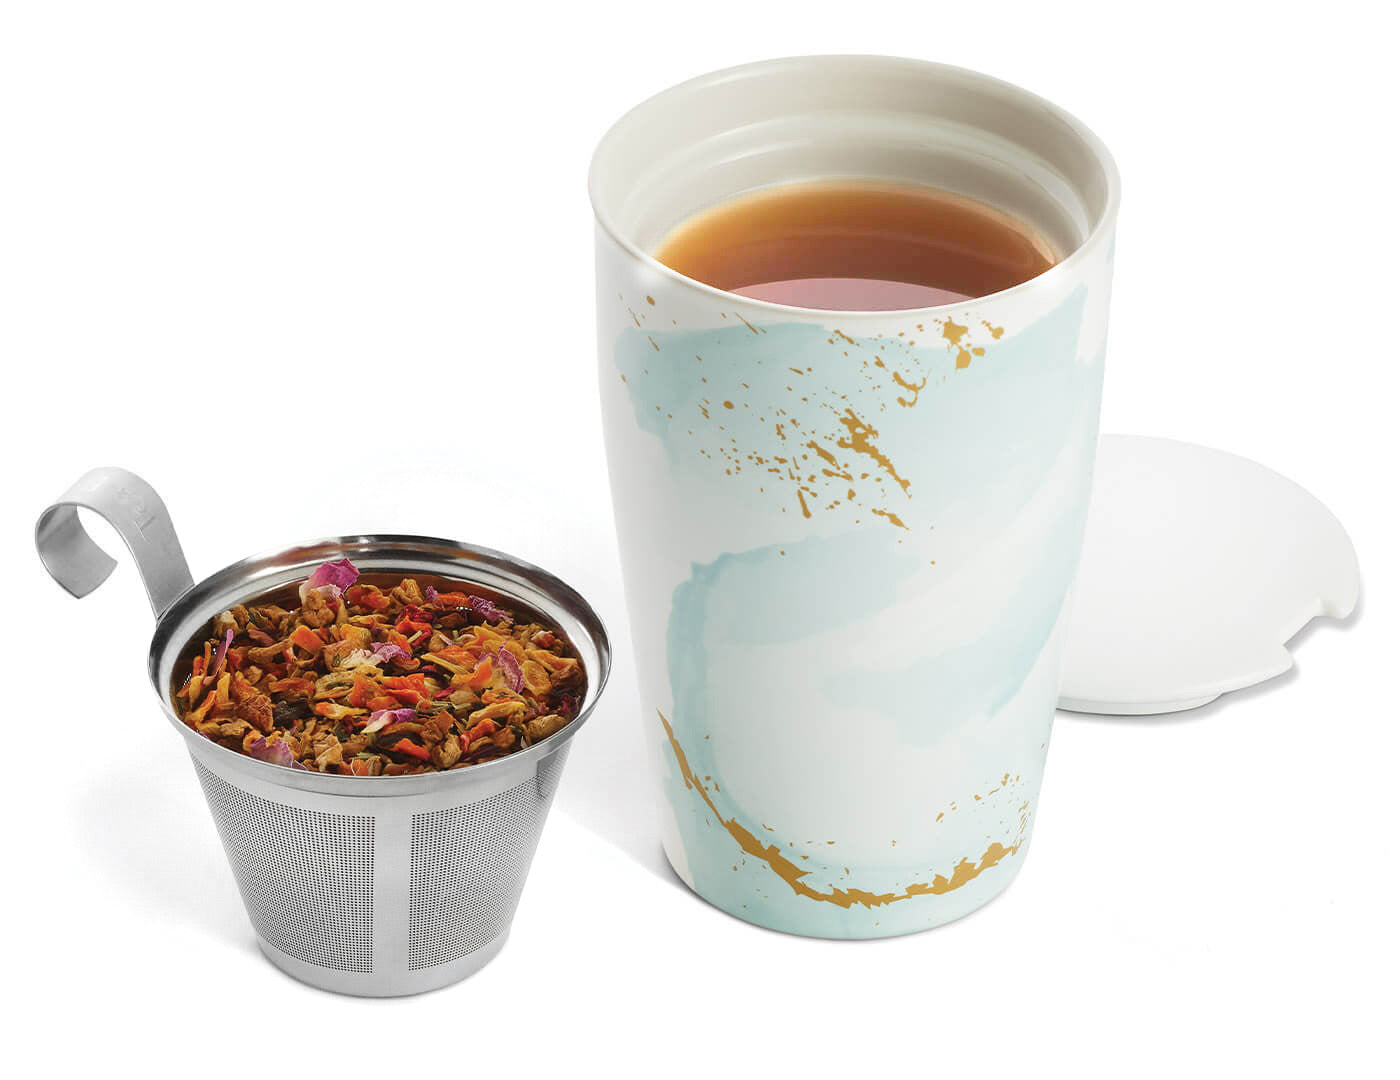 Wellbeing KATI® Steeping Cup with lid off and tea inside cup, the stainless steel infuser basket is out and filled with lid